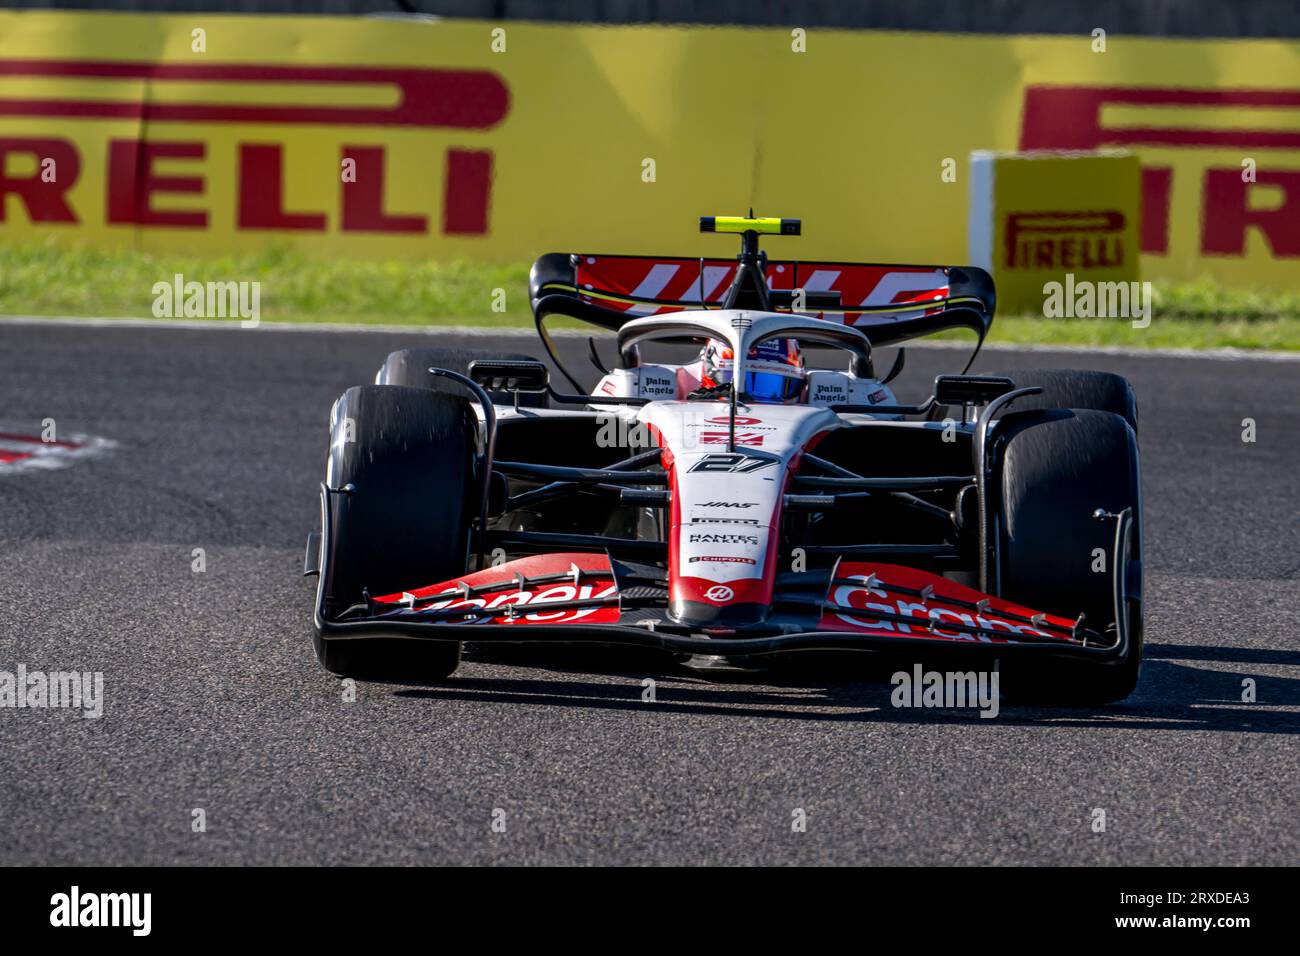 Suzuka, Japan, September 24, Nico Hulkenberg, from Germany competes for Haas F1